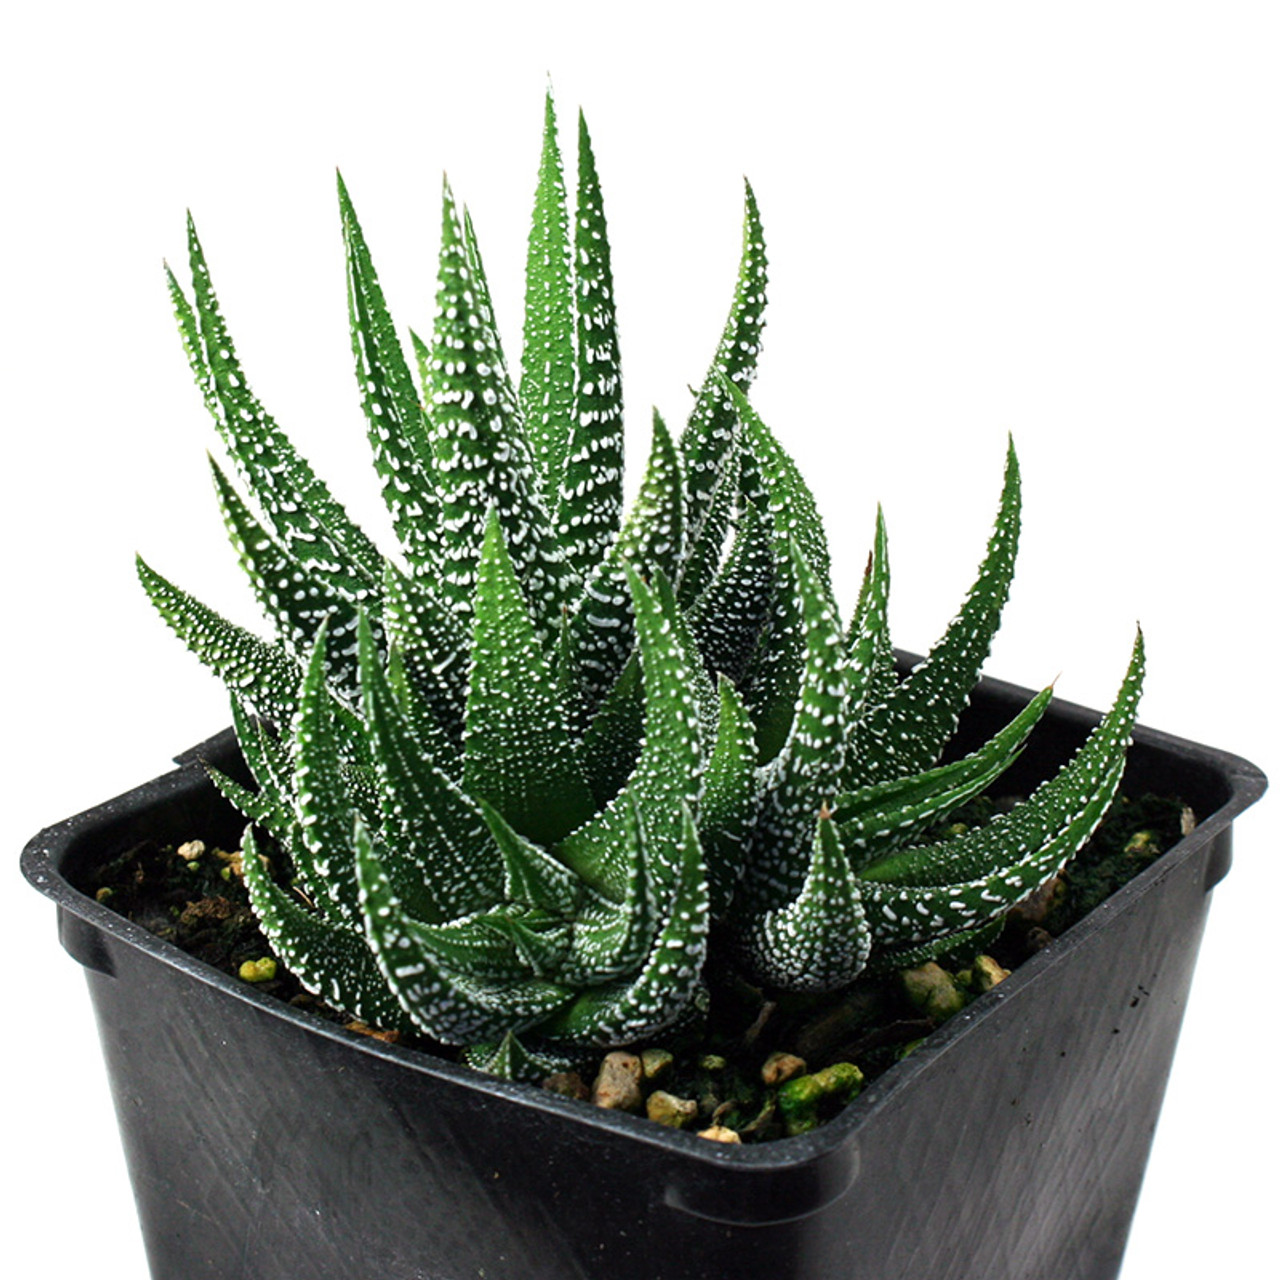 Haworthia Concolor Succulents For Sale,Pad Thai Noodles And Company